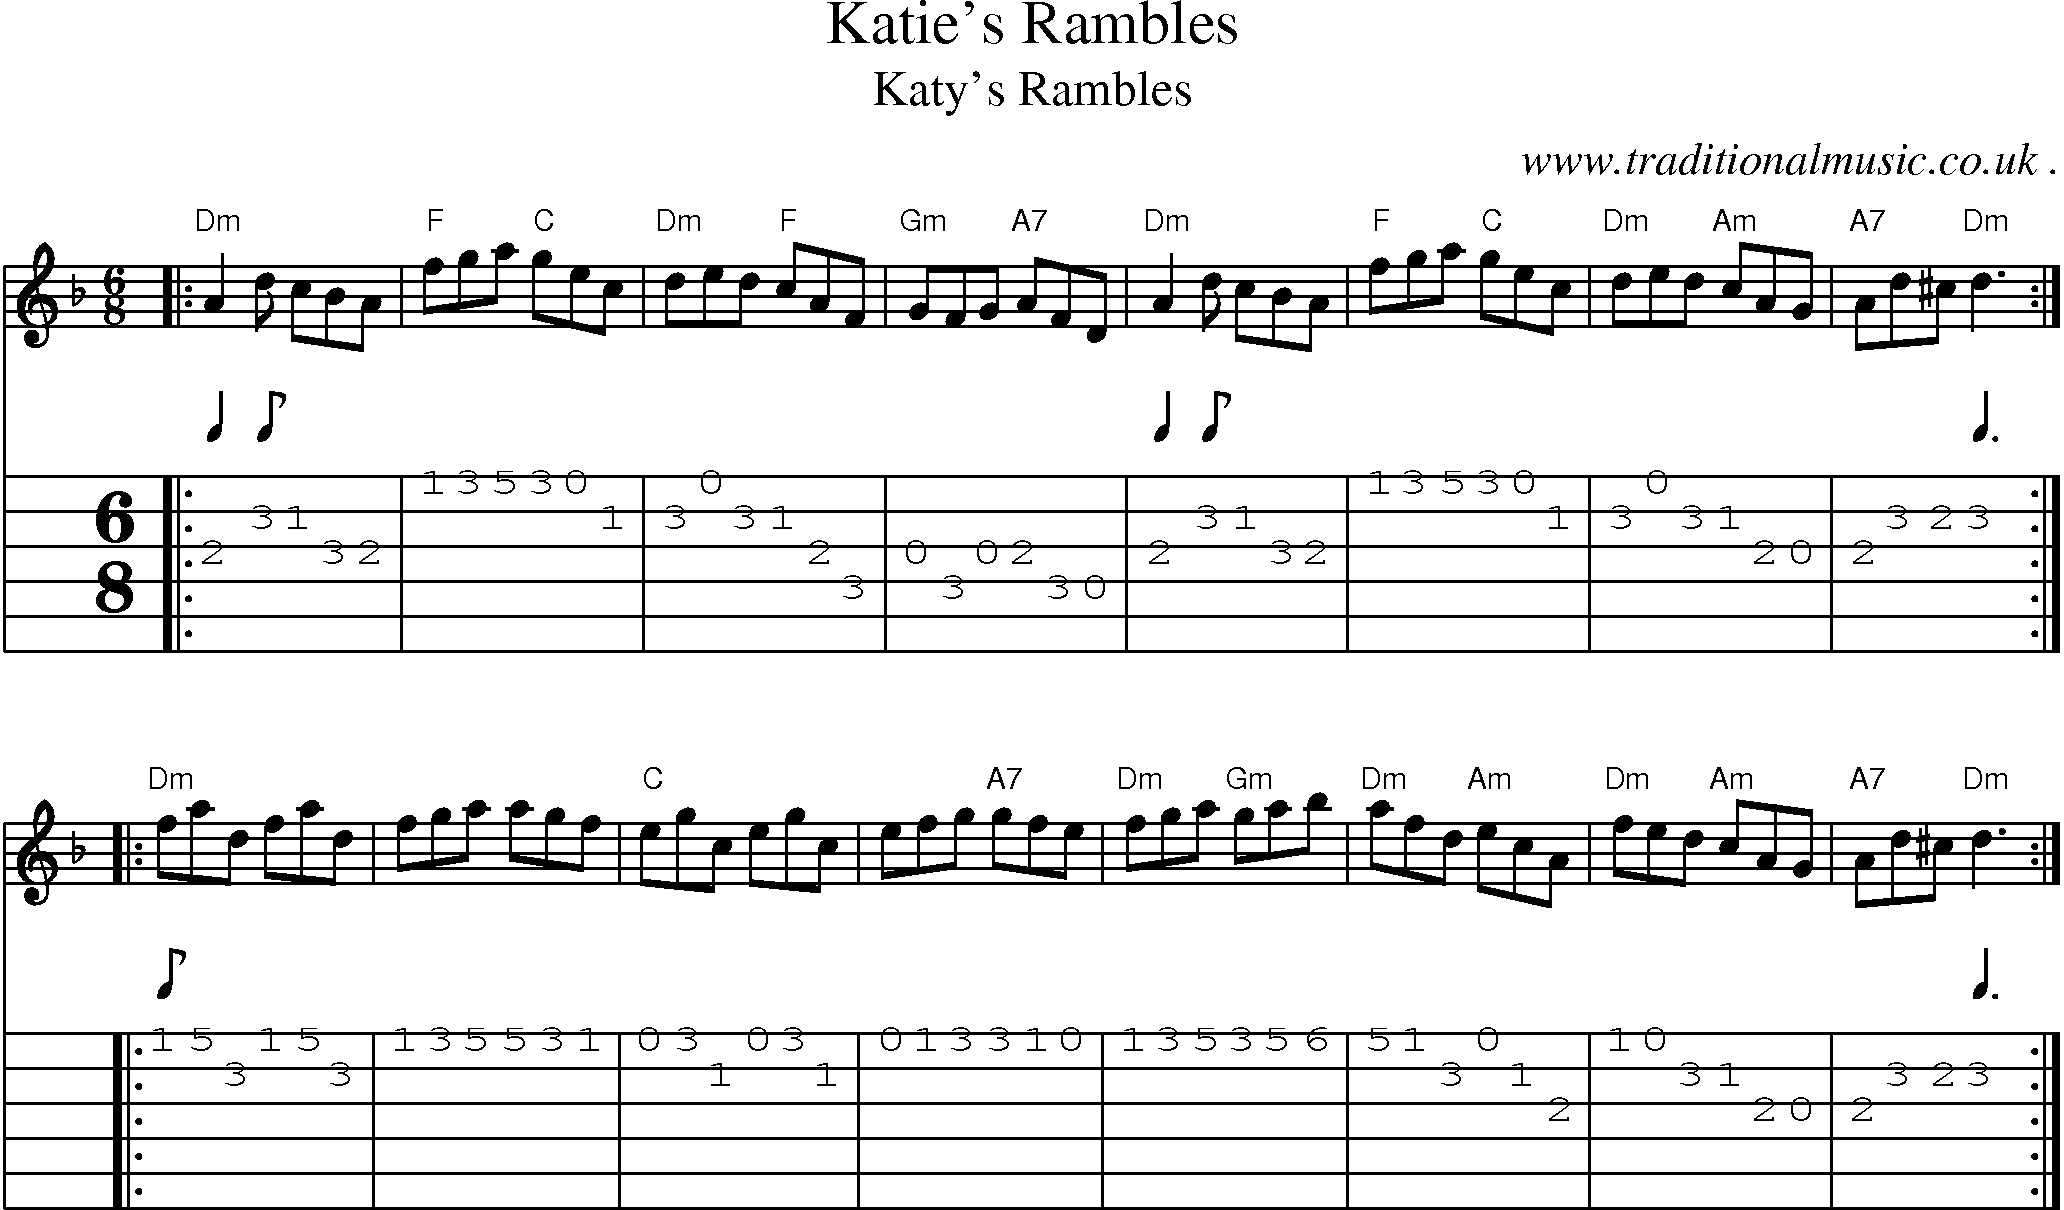 Sheet-music  score, Chords and Guitar Tabs for Katies Rambles